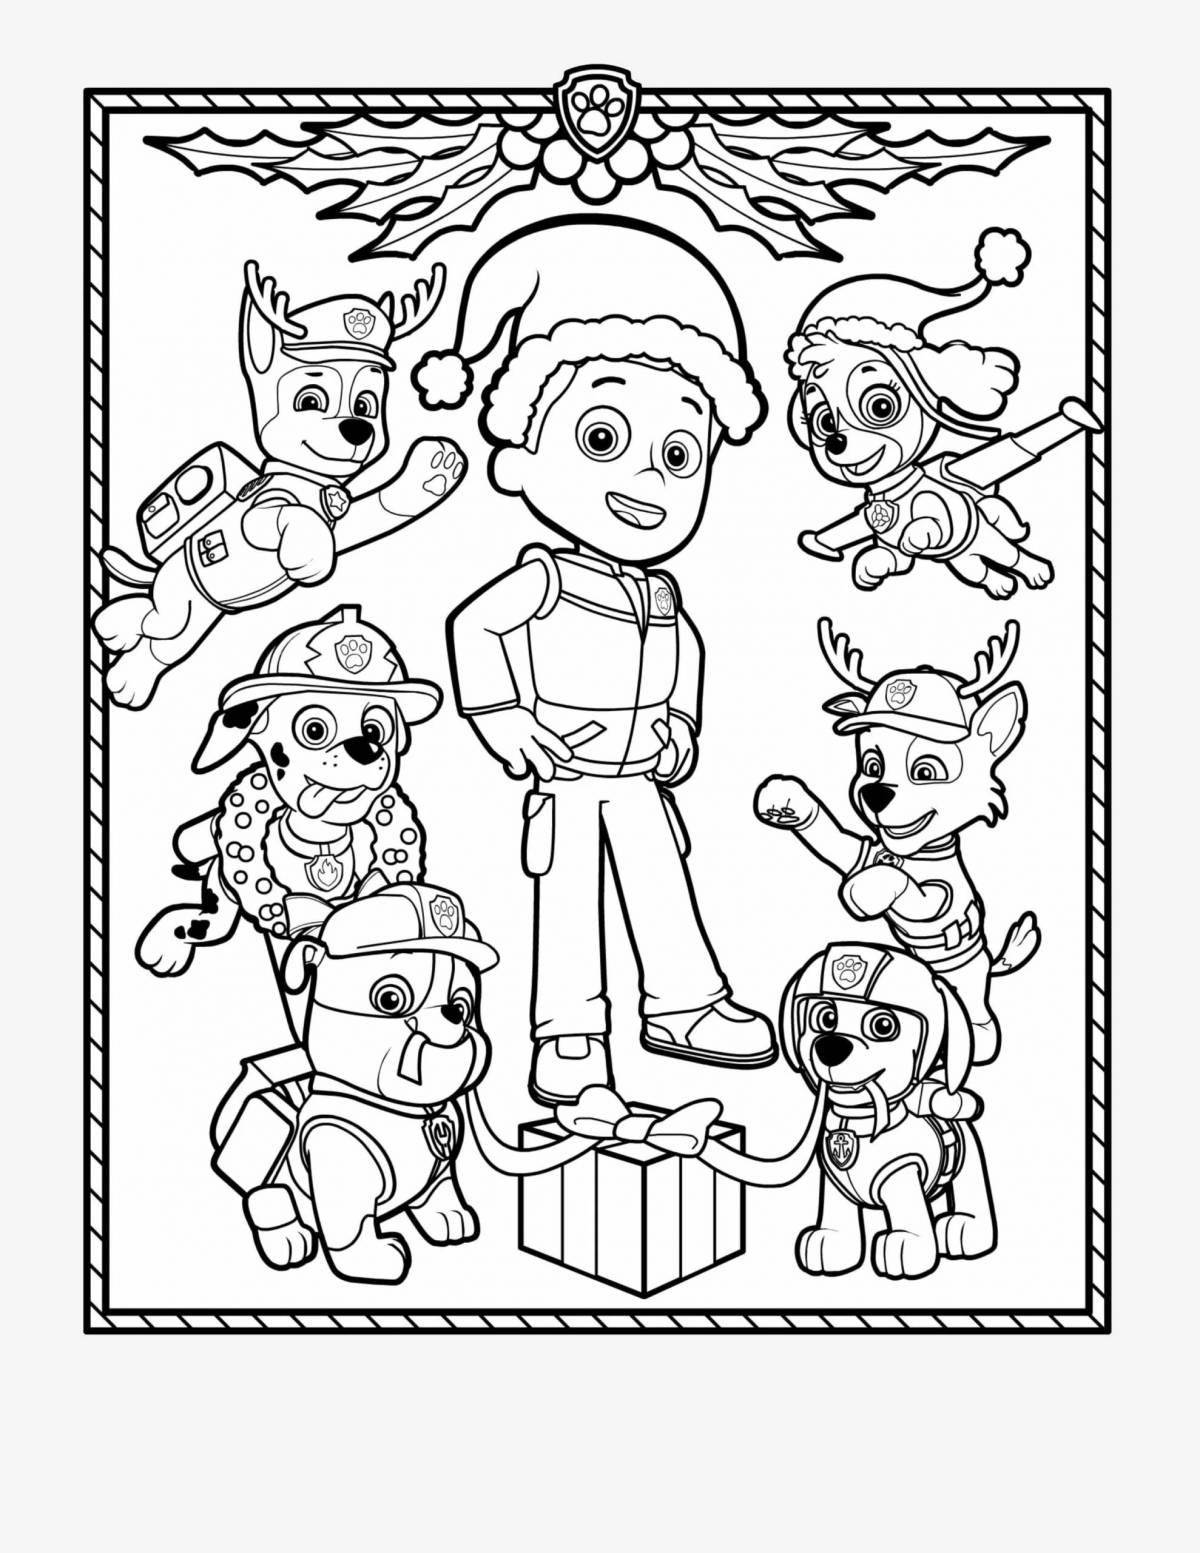 Puppy Patrol coloring book for kids 3 4